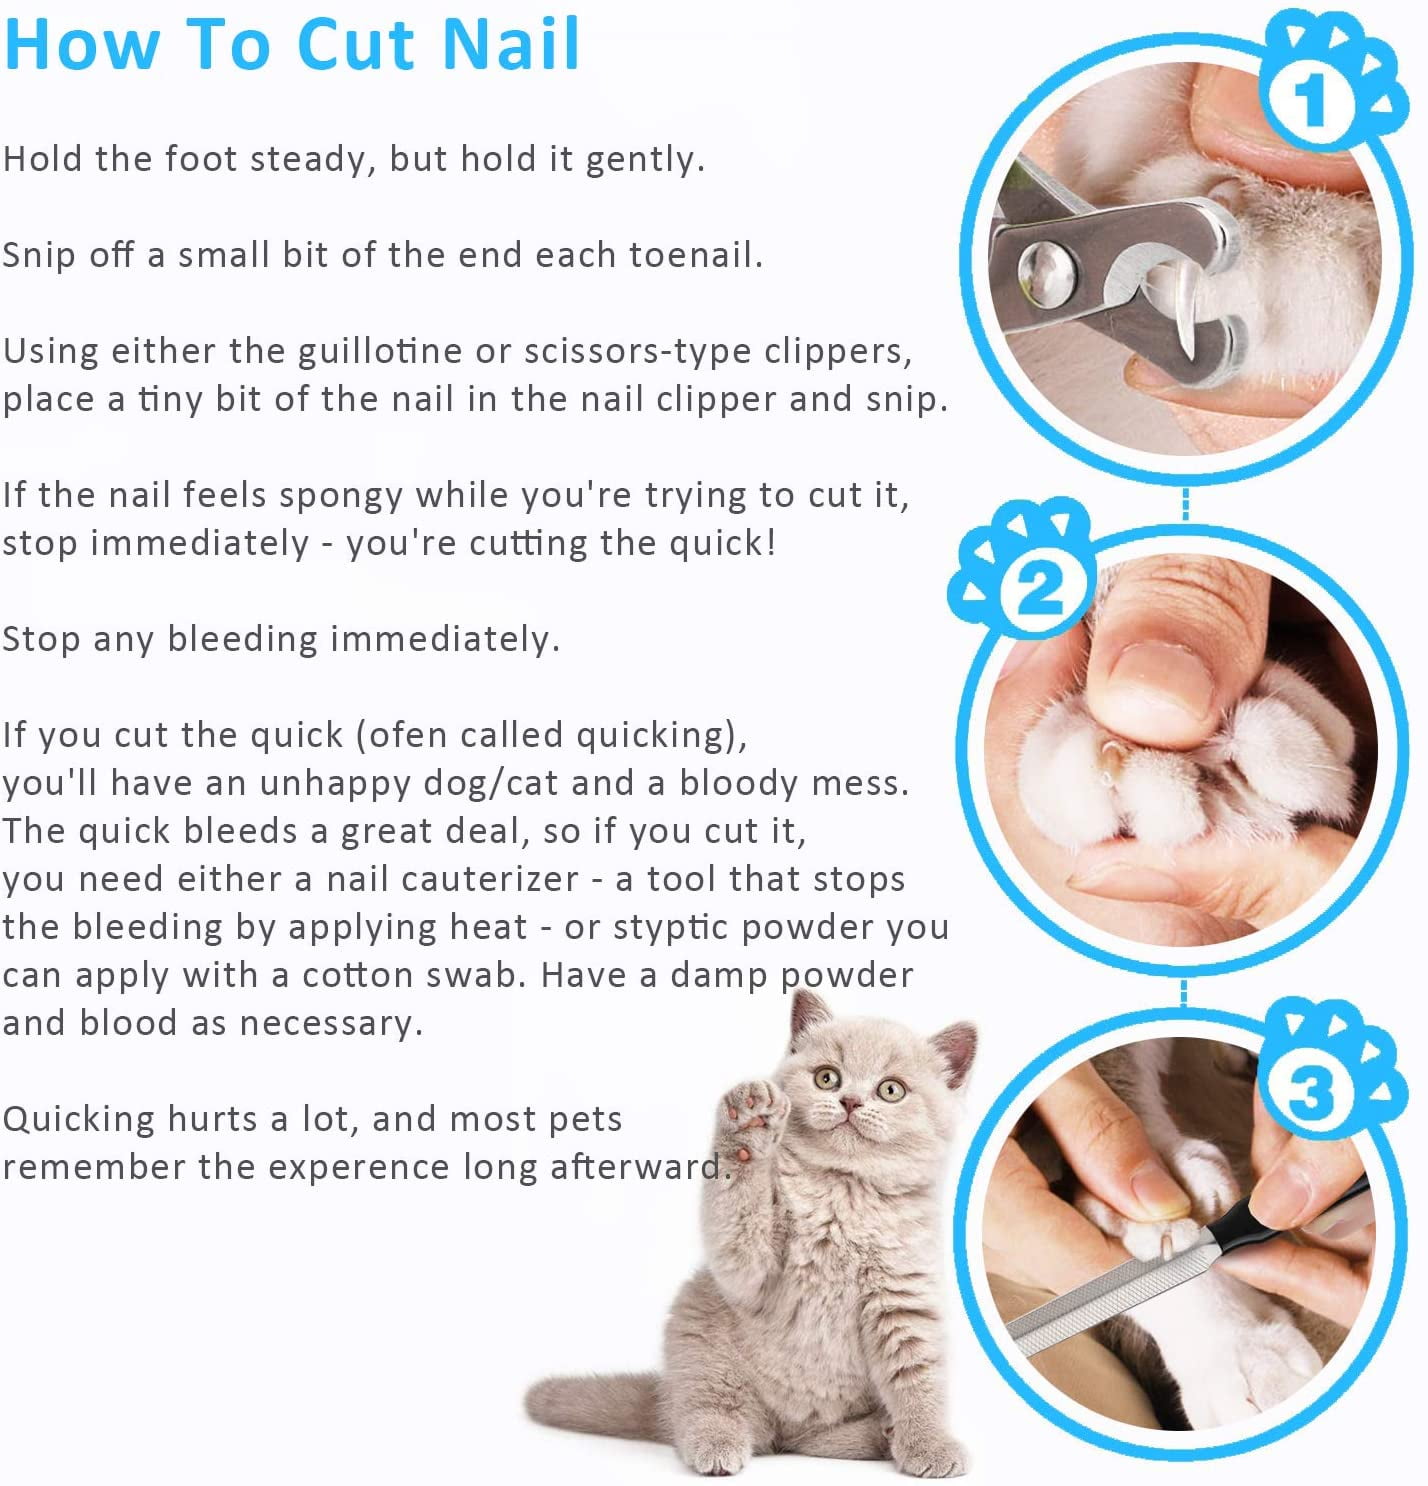 The Mobile Vet Nurse - A quick check in to make sure you keep an eye on  your kittys claw length! Older or sedentary cats may need their claws  trimmed regularly to